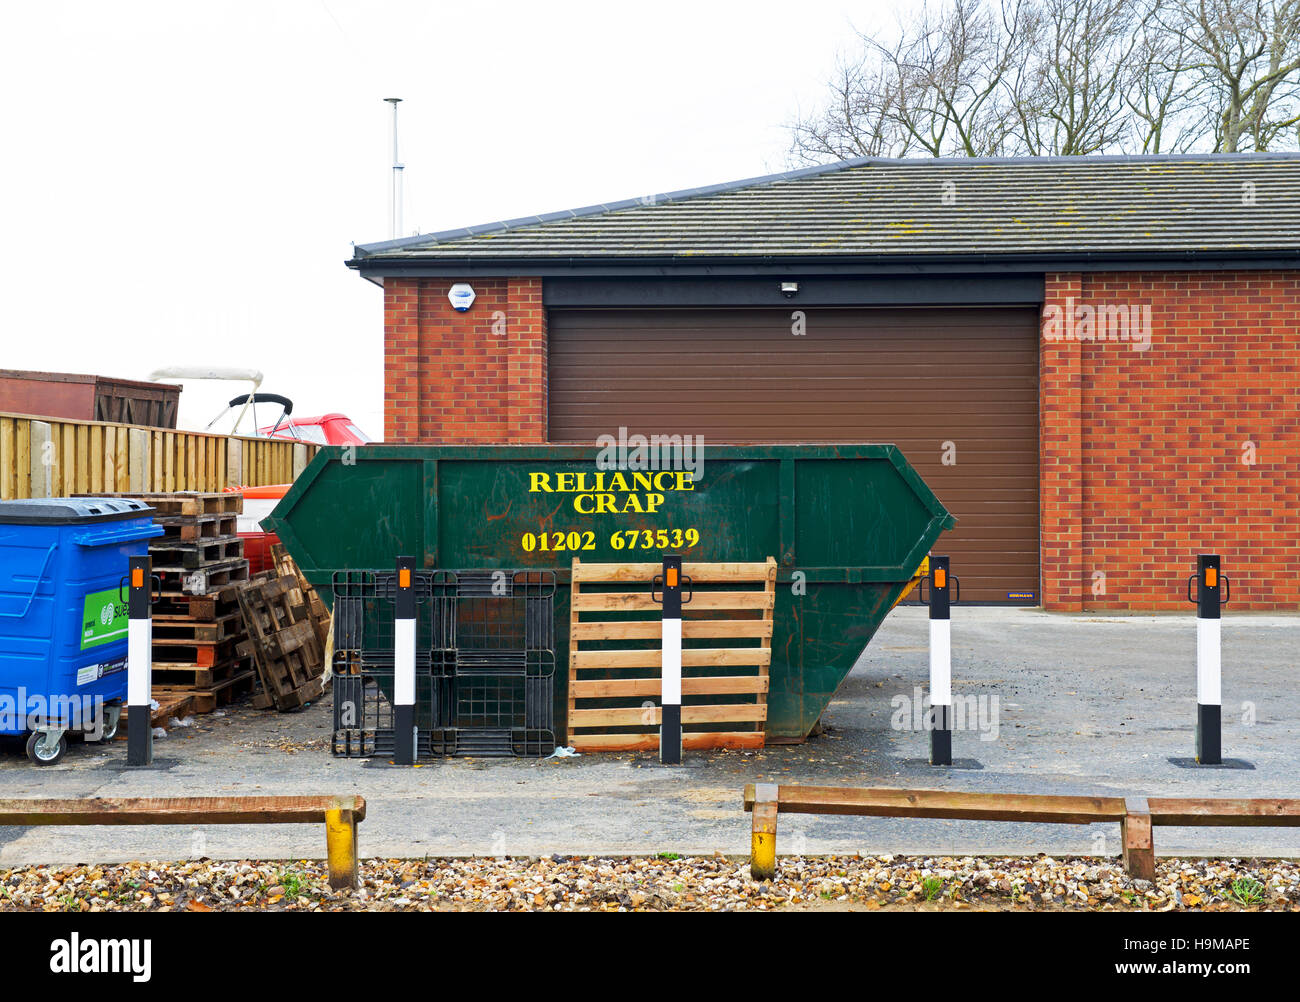 Rubbish Skip from a company called Reliance Crap, England UK Stock Photo